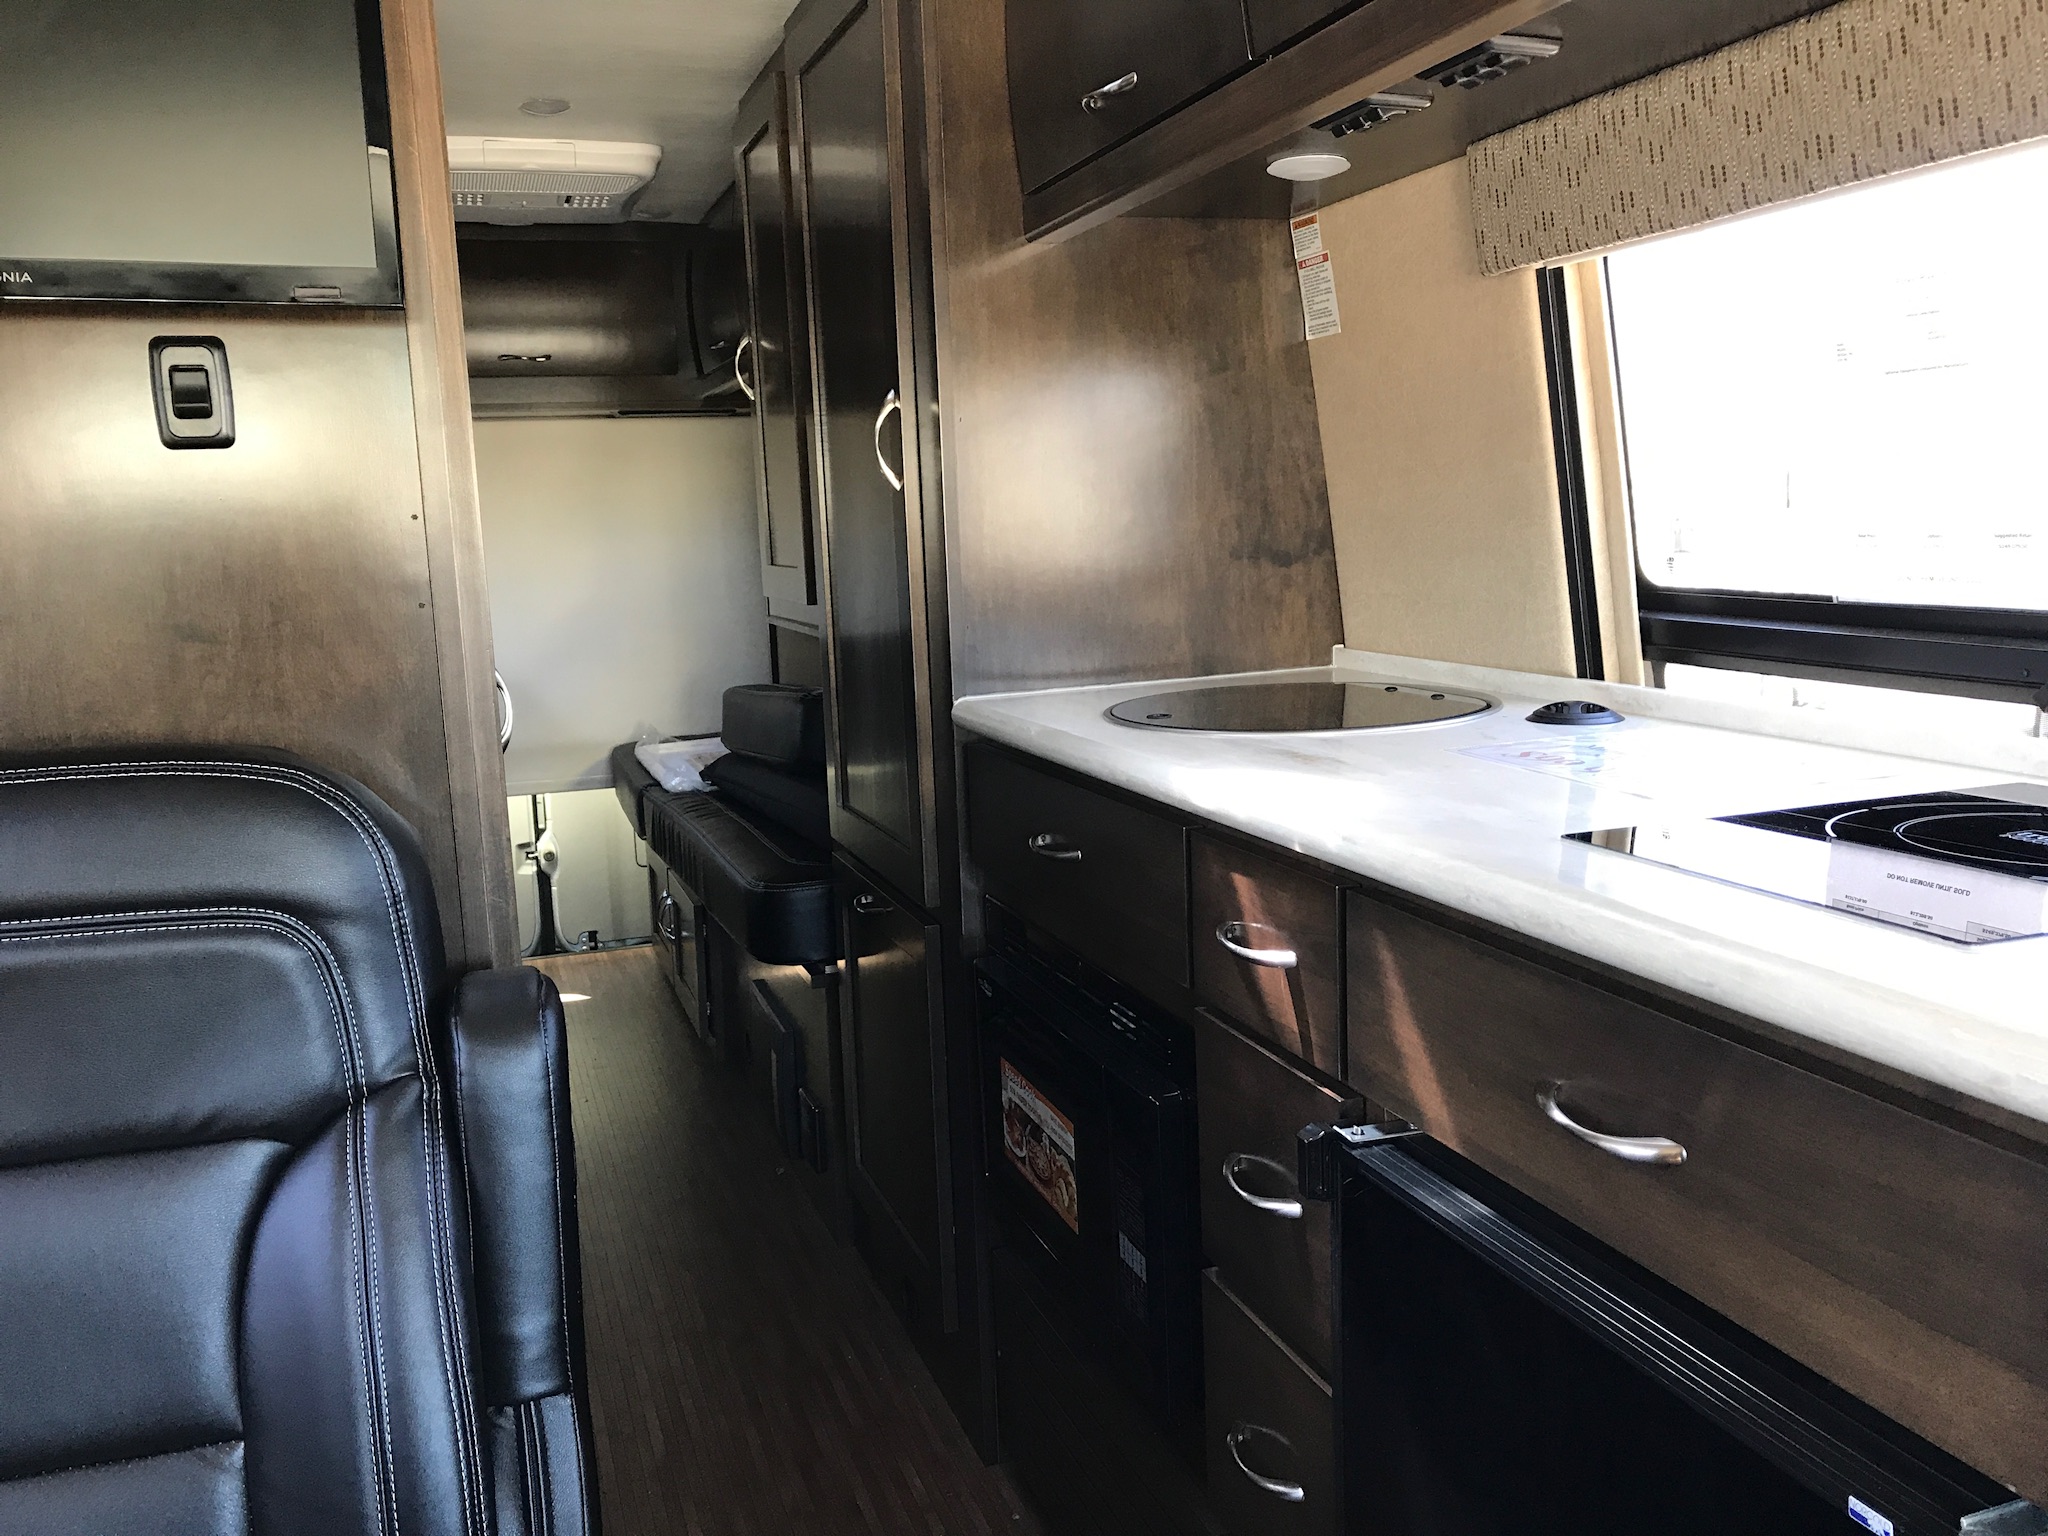 The inside of a Winnebago class B that I looked at yesterday.  Photo taken by and the property of FourWalls.